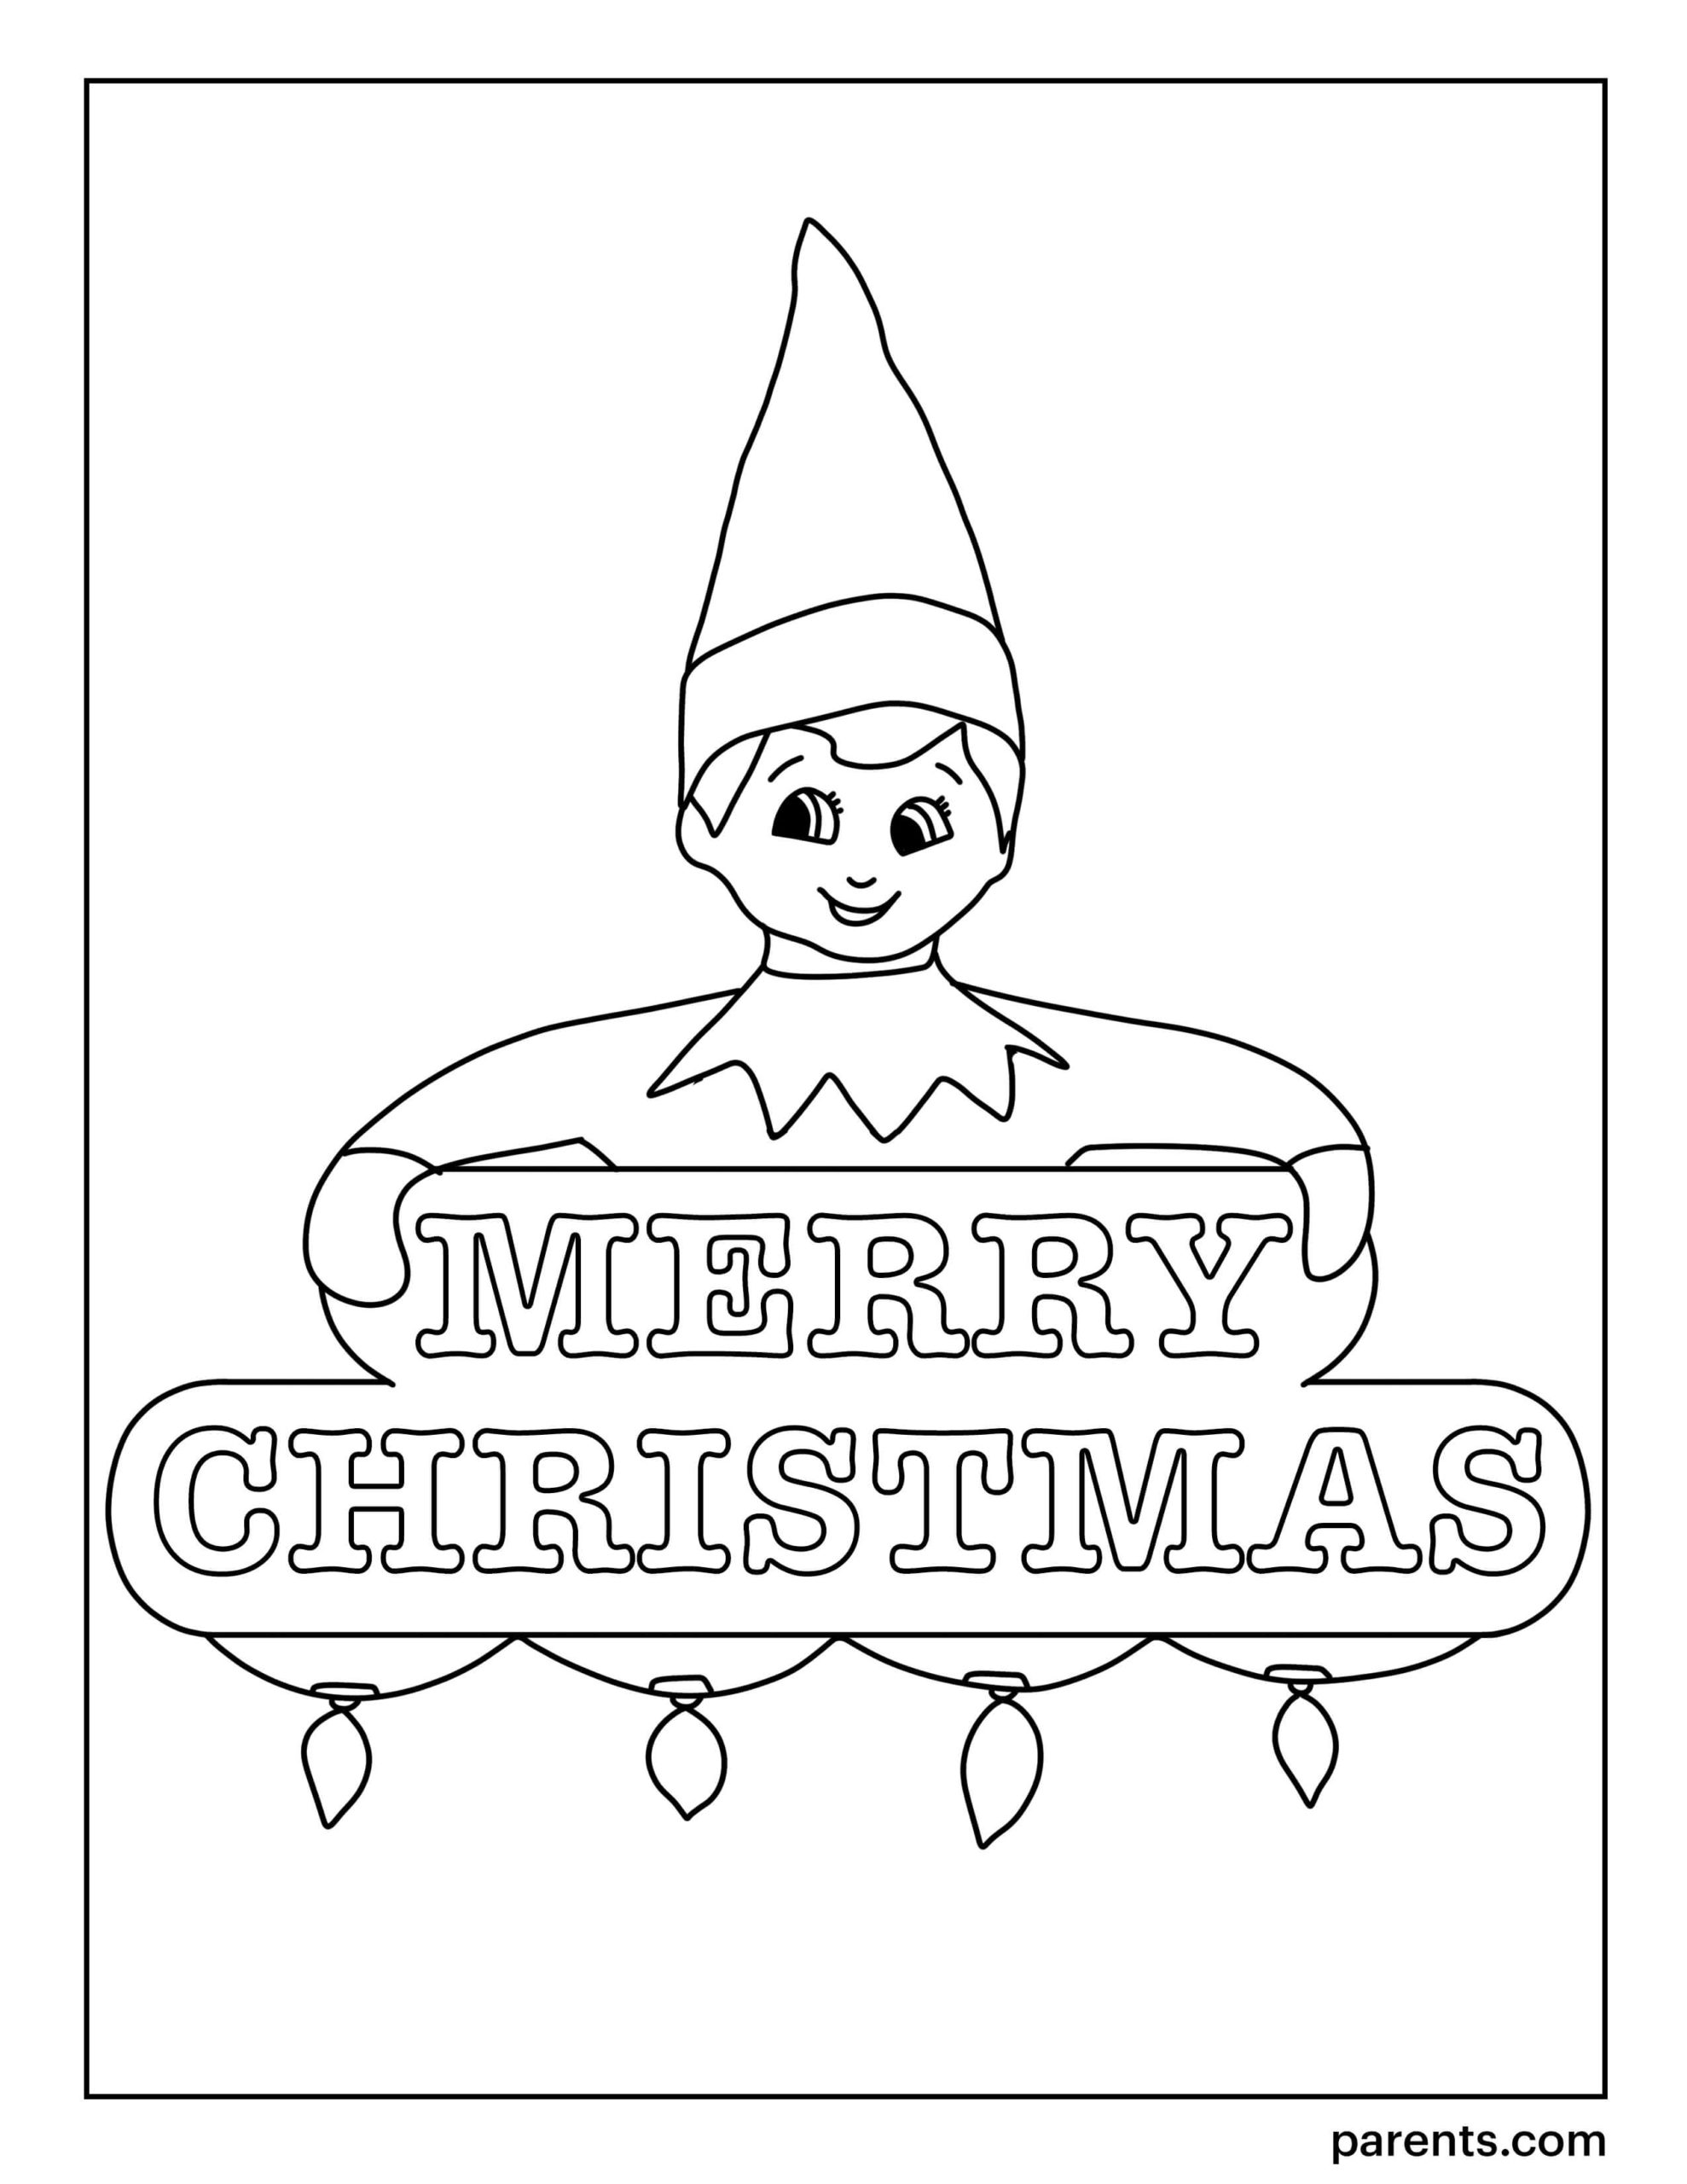 buddy the elf coloring pages | fantasy elf coloring pages | elf coloring pages for adults